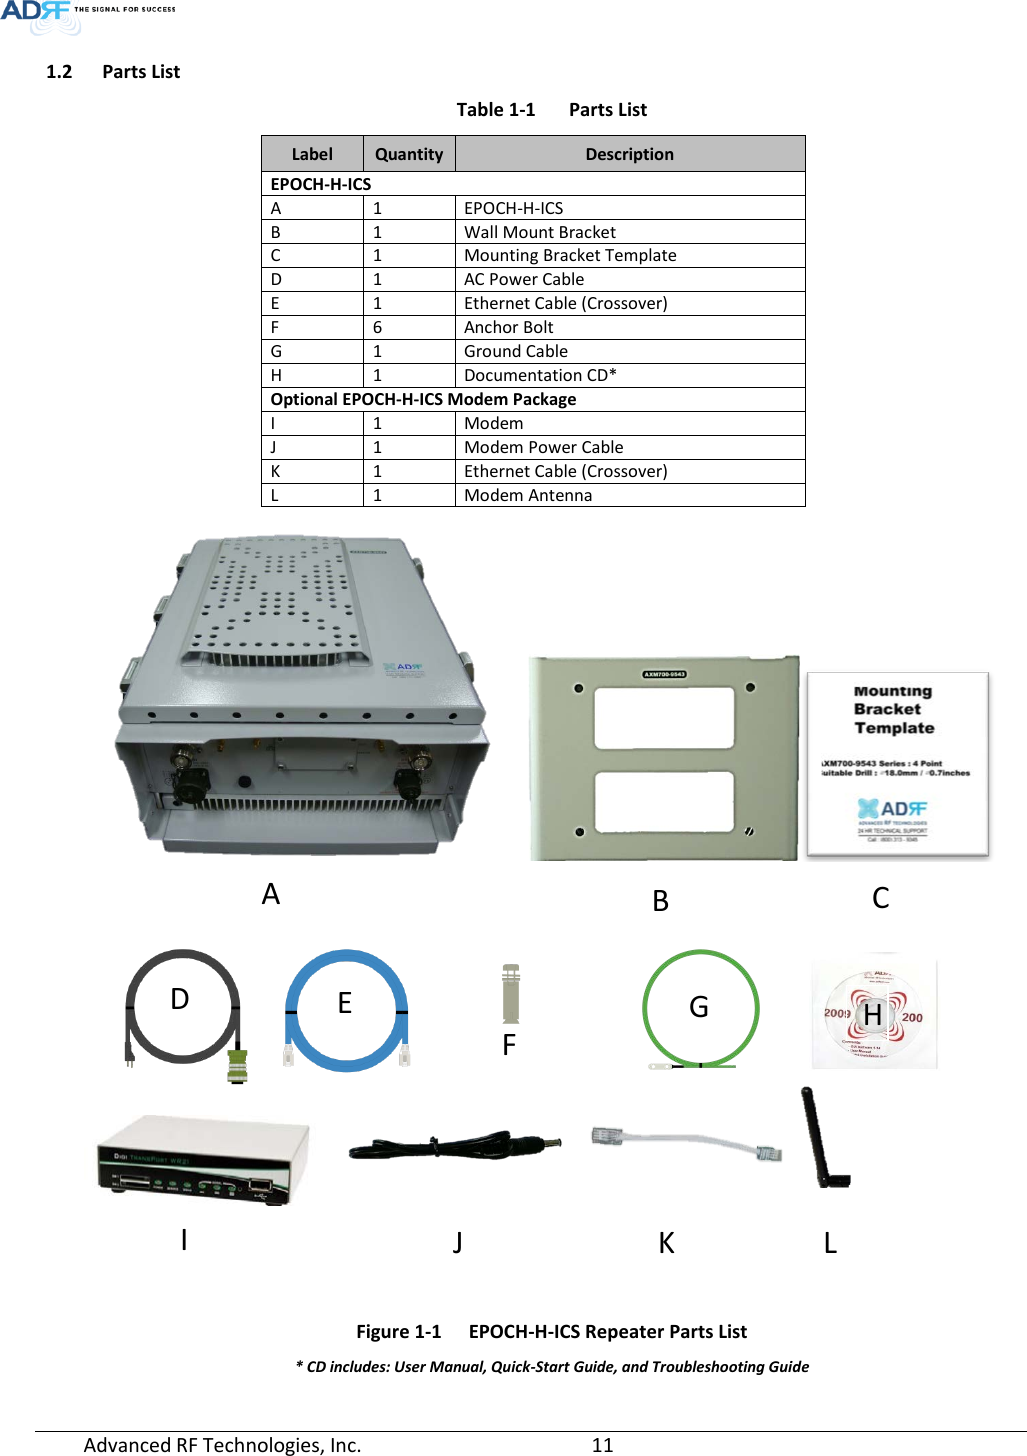  1.2 Parts List Table 1-1  Parts List Label  Quantity  Description EPOCH-H-ICS A 1 EPOCH-H-ICS B 1 Wall Mount Bracket C 1 Mounting Bracket Template D 1 AC Power Cable E 1 Ethernet Cable (Crossover) F 6 Anchor Bolt G 1 Ground Cable H 1 Documentation CD* Optional EPOCH-H-ICS Modem Package I 1 Modem J 1 Modem Power Cable K 1 Ethernet Cable (Crossover) L 1 Modem Antenna                                       Figure 1-1  EPOCH-H-ICS Repeater Parts List * CD includes: User Manual, Quick-Start Guide, and Troubleshooting Guide D E F B G H A I J K L C Advanced RF Technologies, Inc.       11    